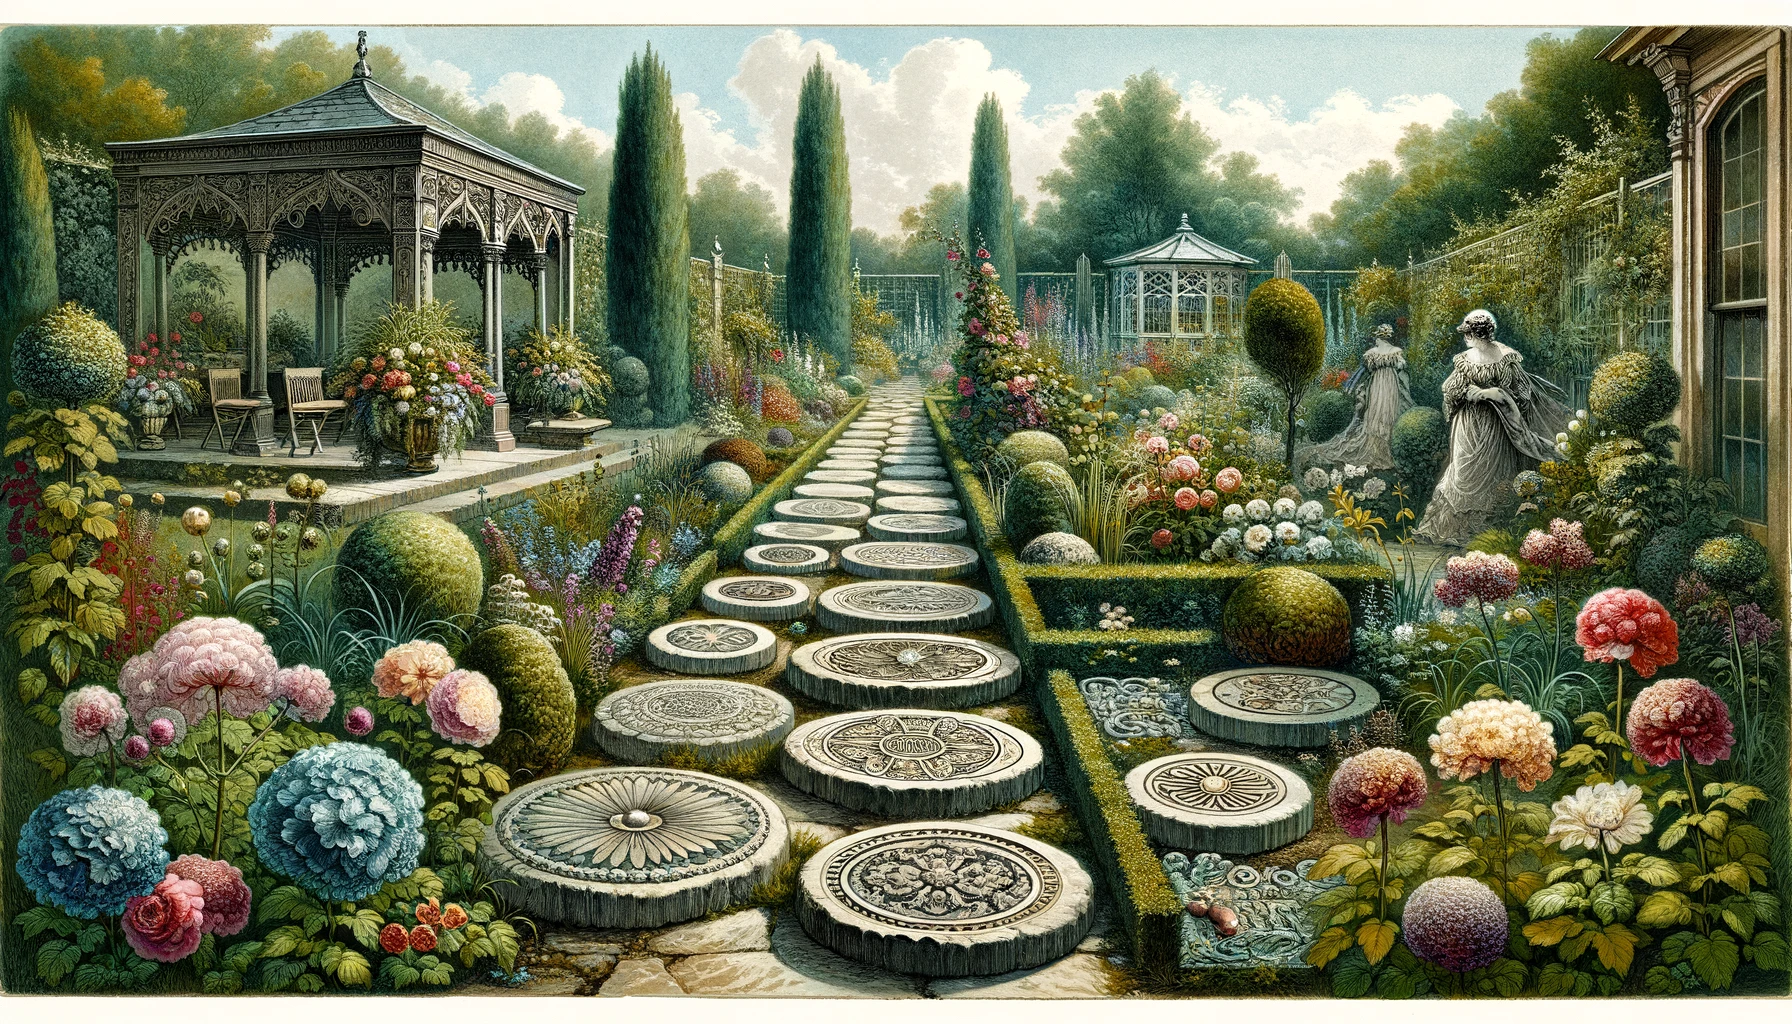 Victorian Garden with Decorative Stepping Stones